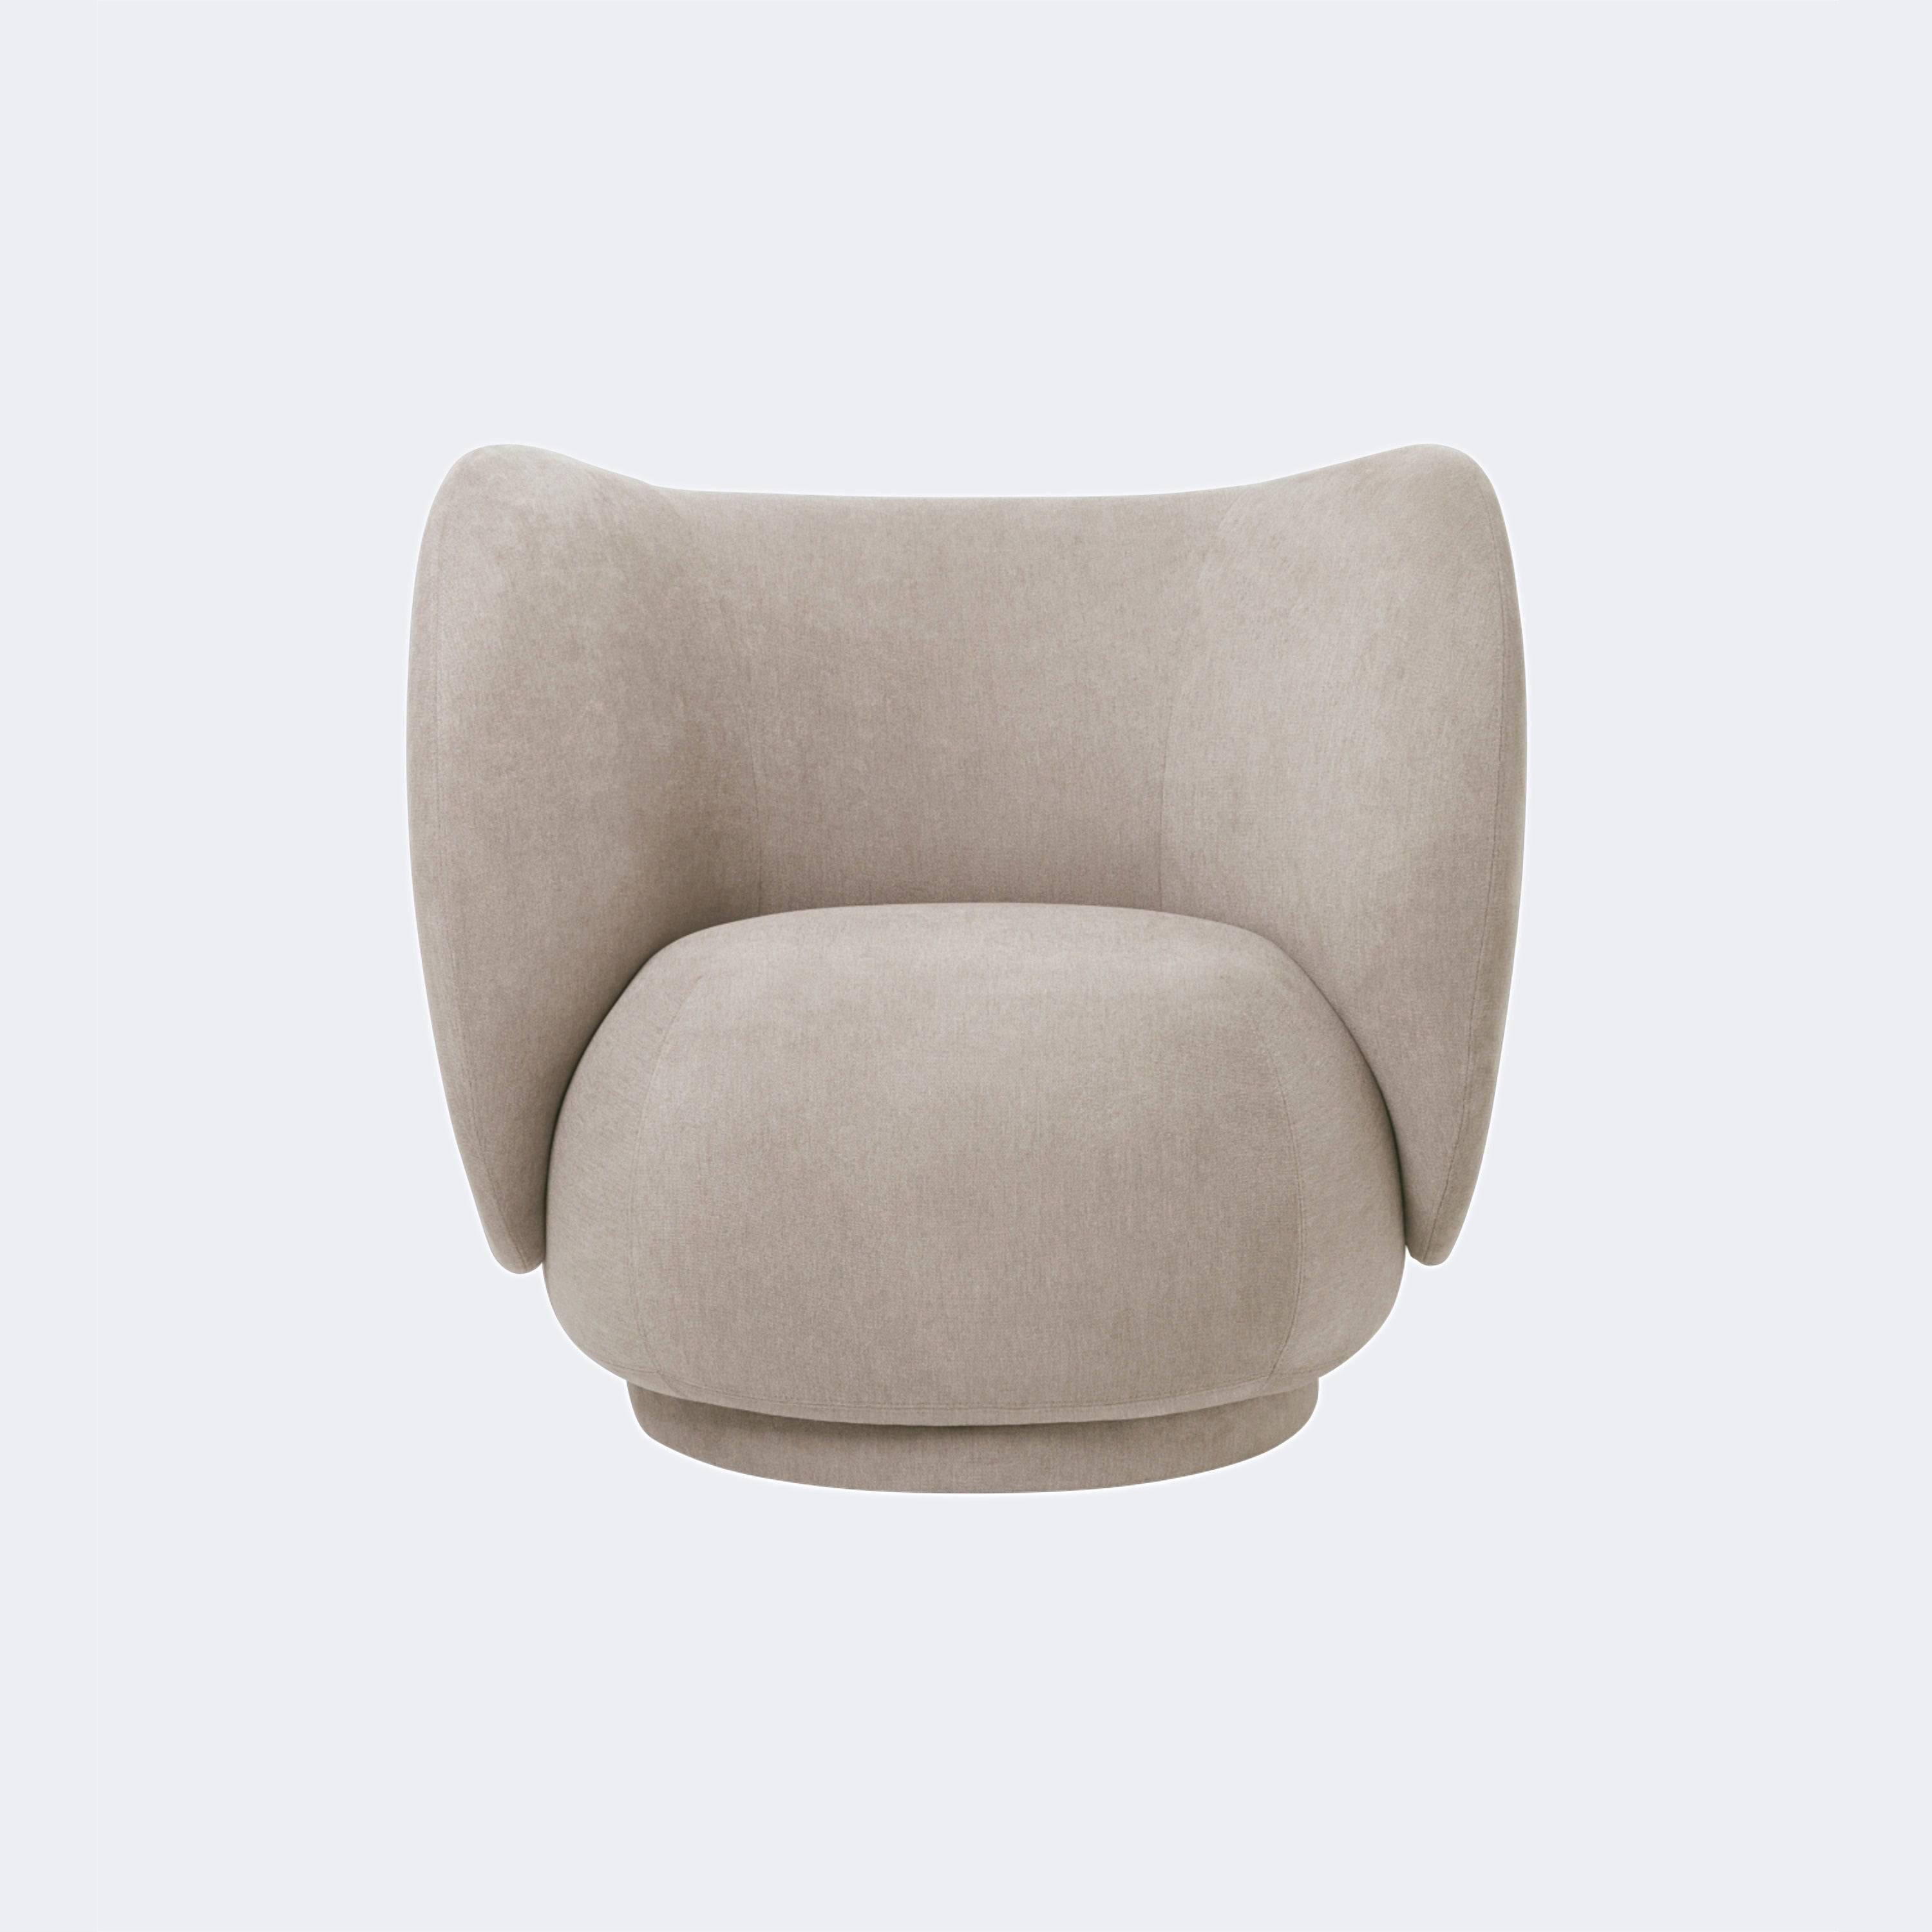 Ferm Living Rico Lounge Chair - Swivel Base Made To Order (18-20 Weeks) Brushed Sand - KANSO#Fabric_Brushed Sand